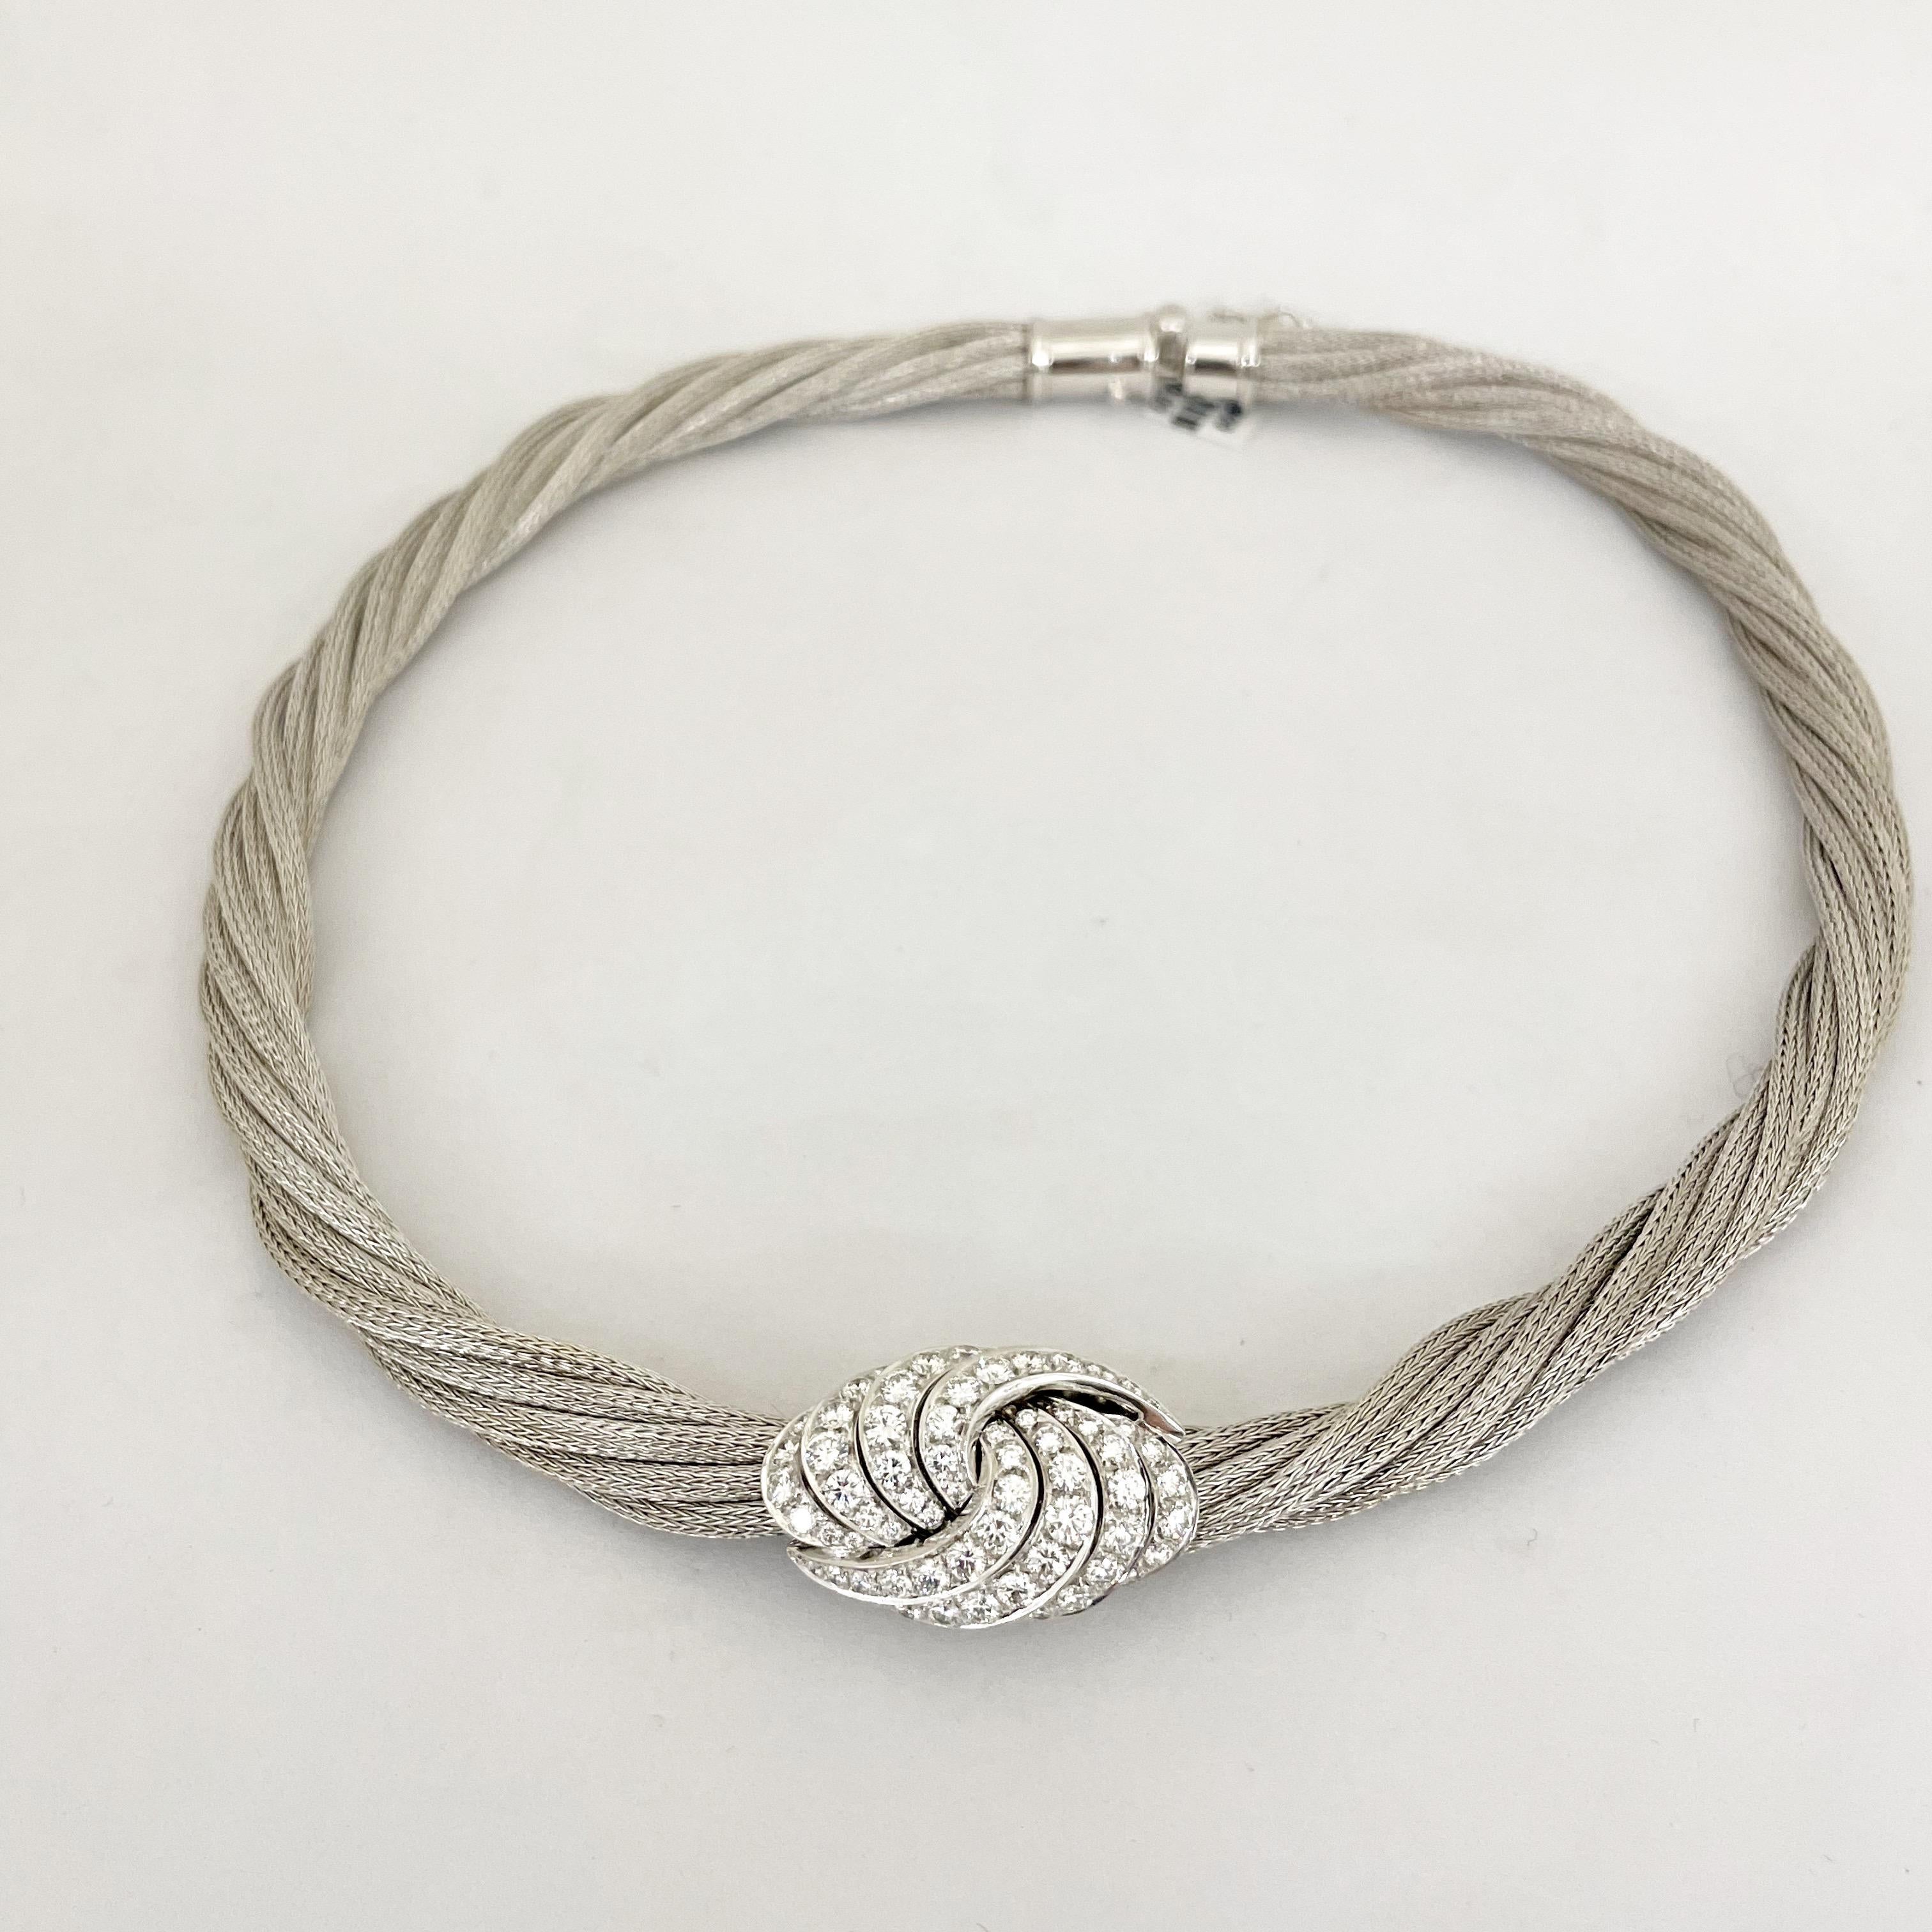 Crafted by the famed Italian designer Guiseppe Picchiotti, this choker necklace is a perfect example of his detailed work and timeless style. The choker is designed with twisted rope chains of matte 18 karat white gold. The  1-1/4